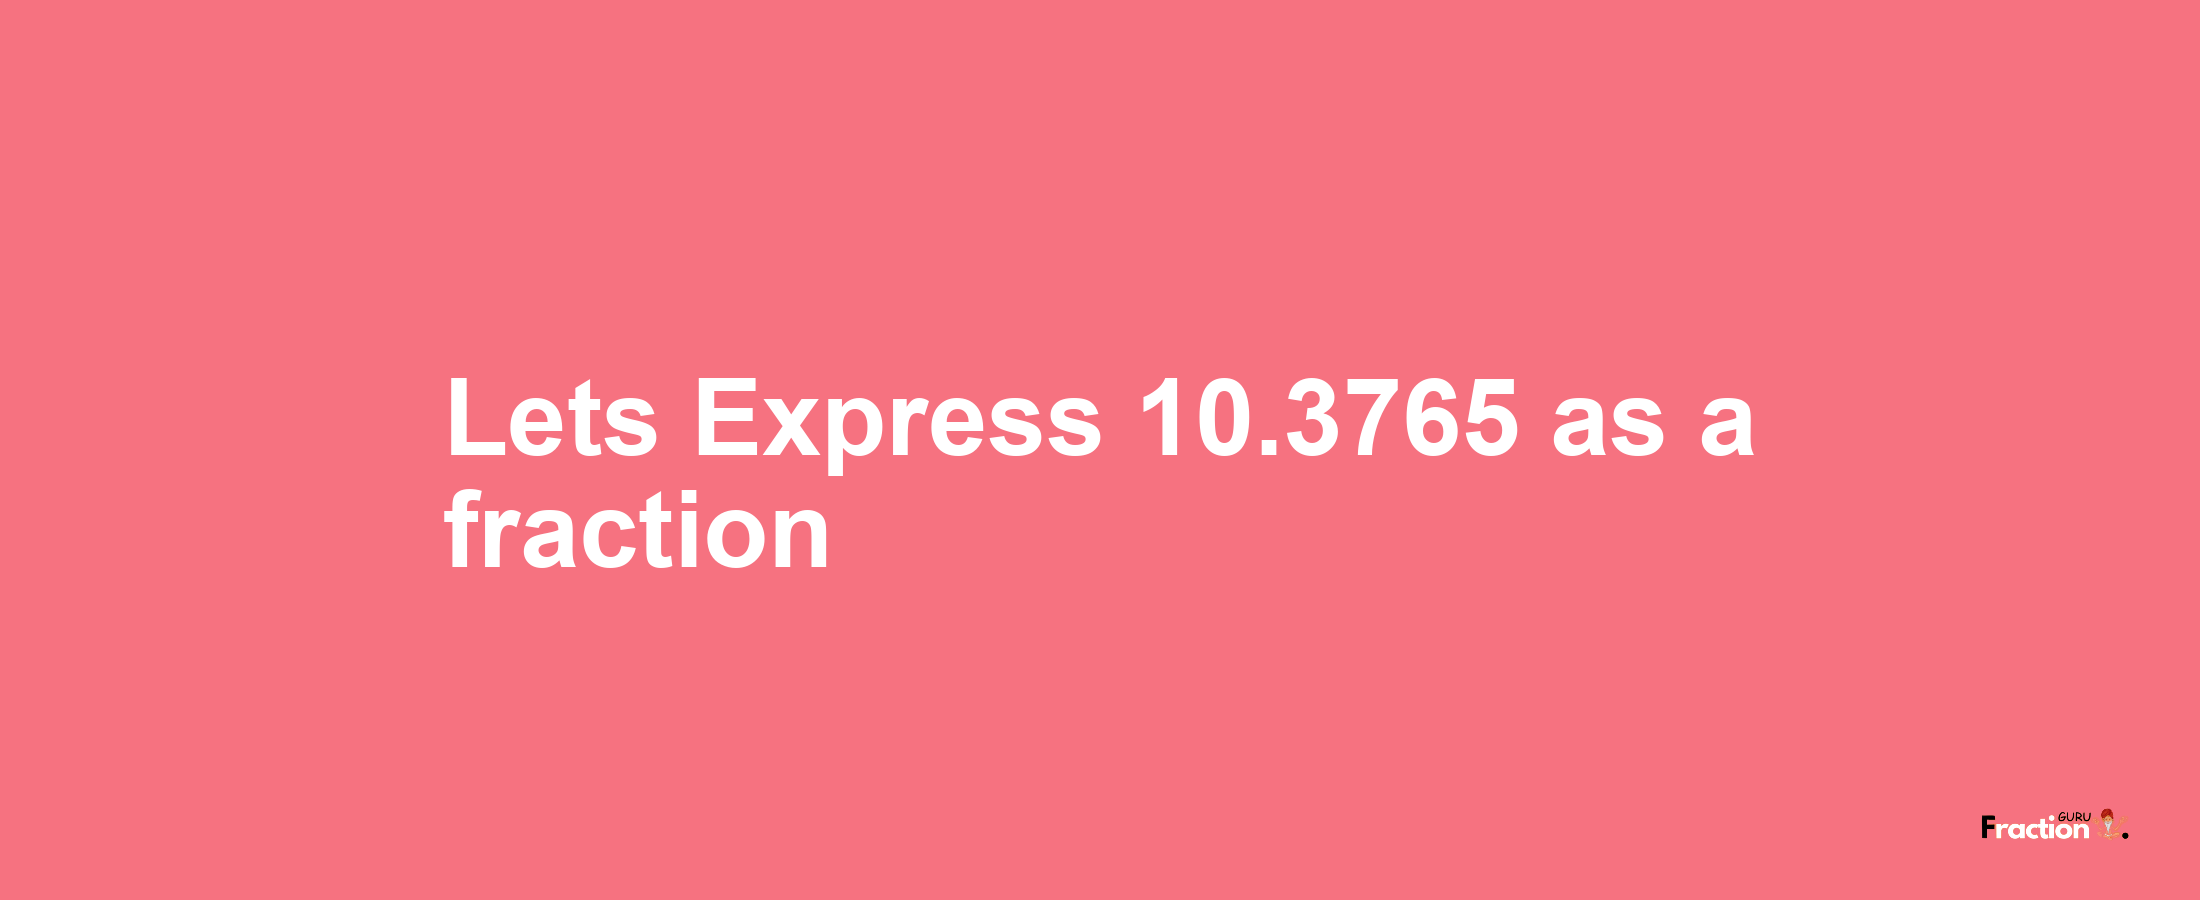 Lets Express 10.3765 as afraction